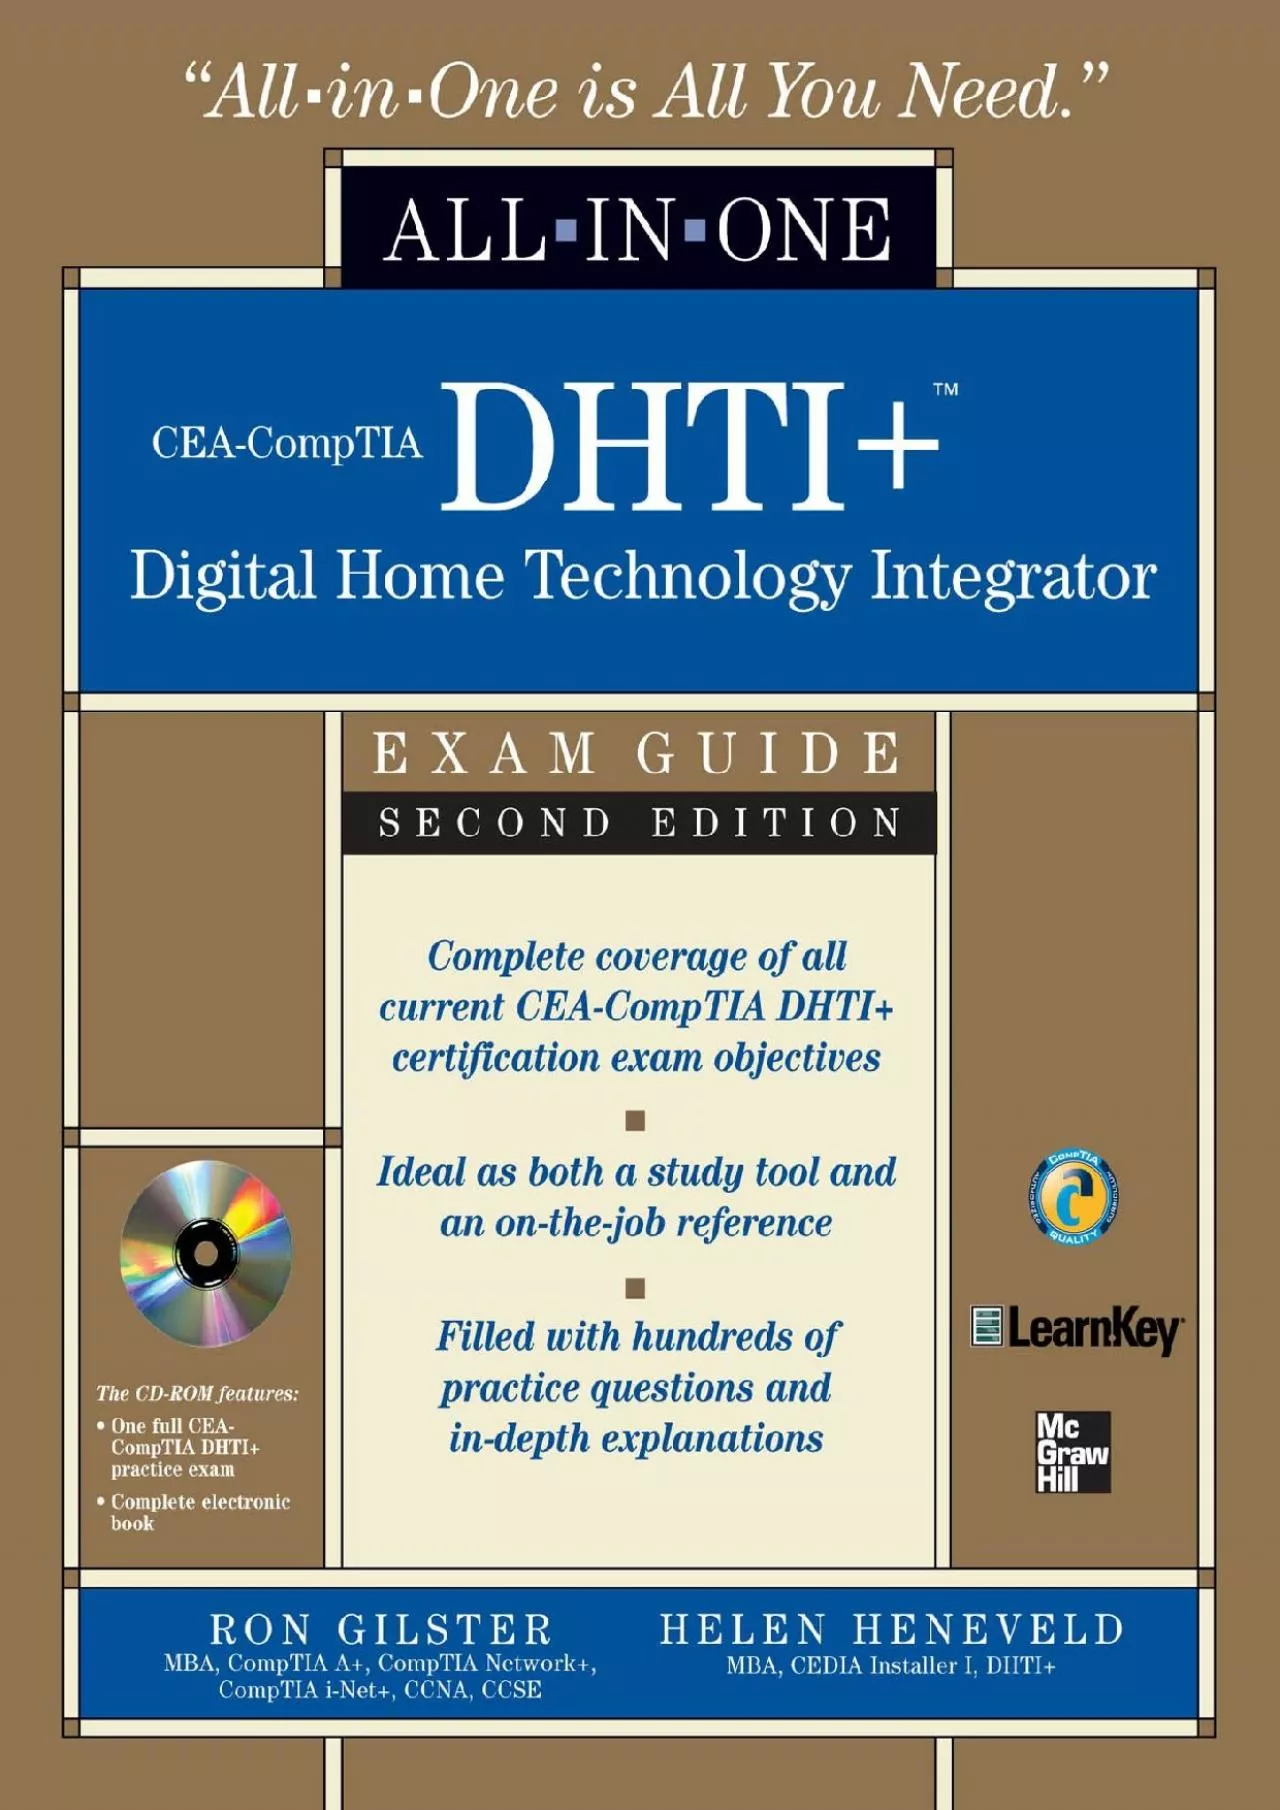 [FREE]-CEA-CompTIA DHTI+ Digital Home Technology Integrator All-In-One Exam Guide, Second